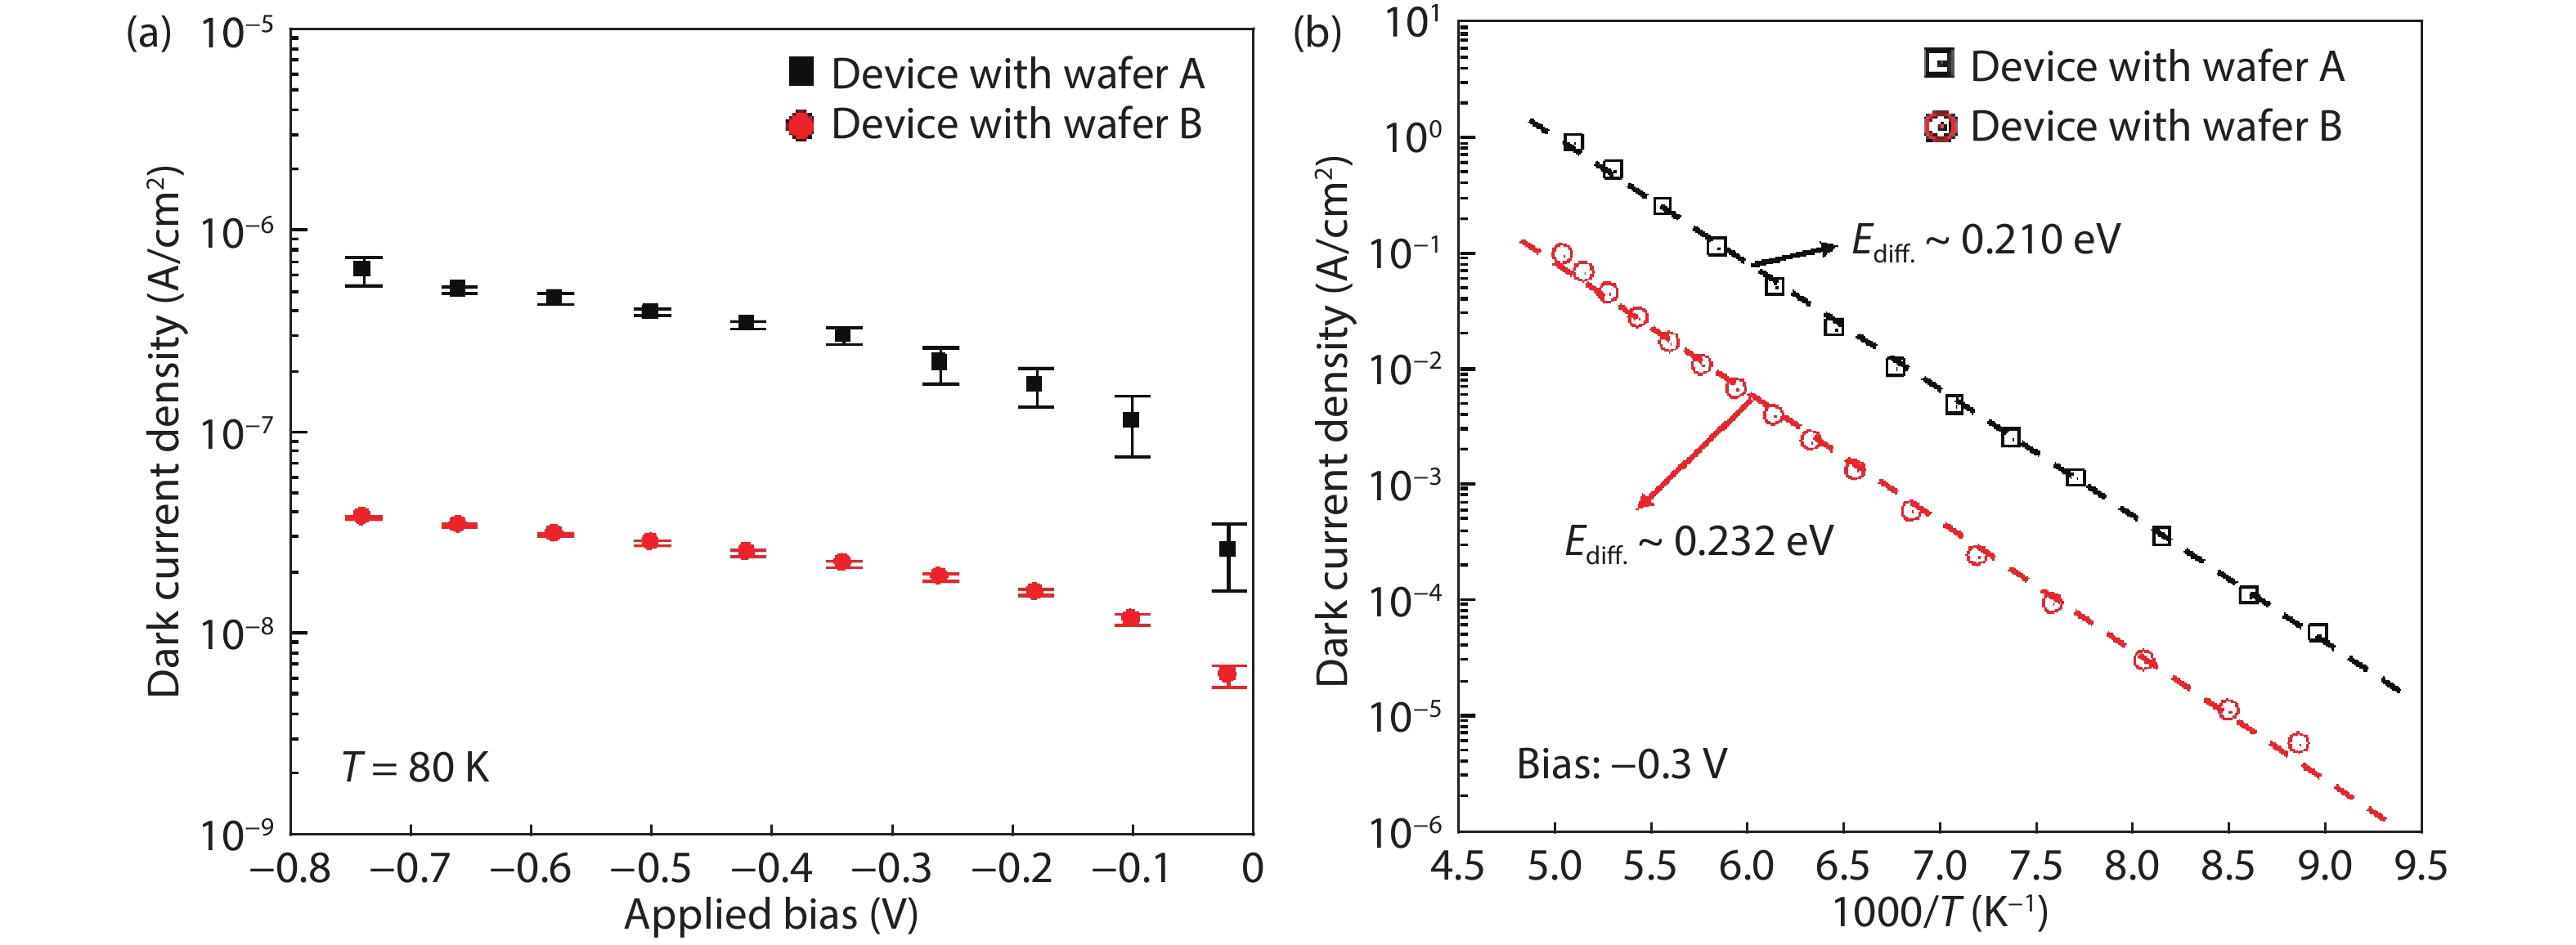 (Color online) (a) The dark current density versus applied bias at 80 K. The identical fabrication process is used for device fabrication on the wafers A and B. Approximately, one order of magnitude higher dark current density is observed from the devices on the wafer A. (b) Arrhenius plots of the devices fabricated on the wafers A and B. Both devices demonstrate diffusion-limited current but different activation energies. The plot indicates that the minority carrier lifetime in the absorber layer of the devices on the wafer B is longer than those on the wafer A.